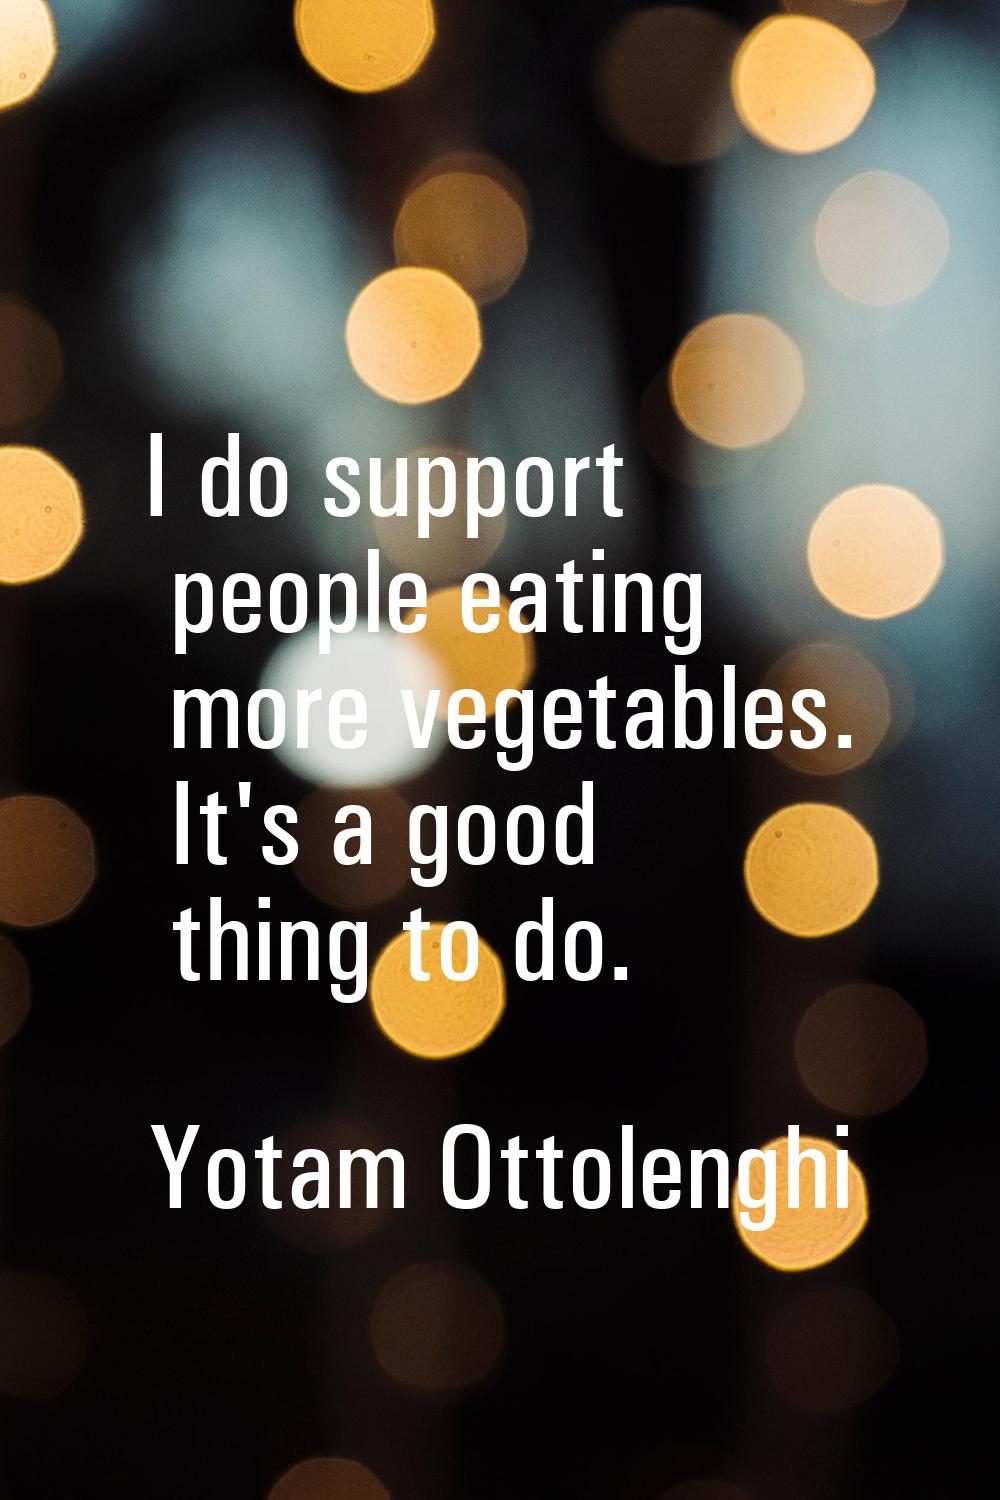 I do support people eating more vegetables. It's a good thing to do.